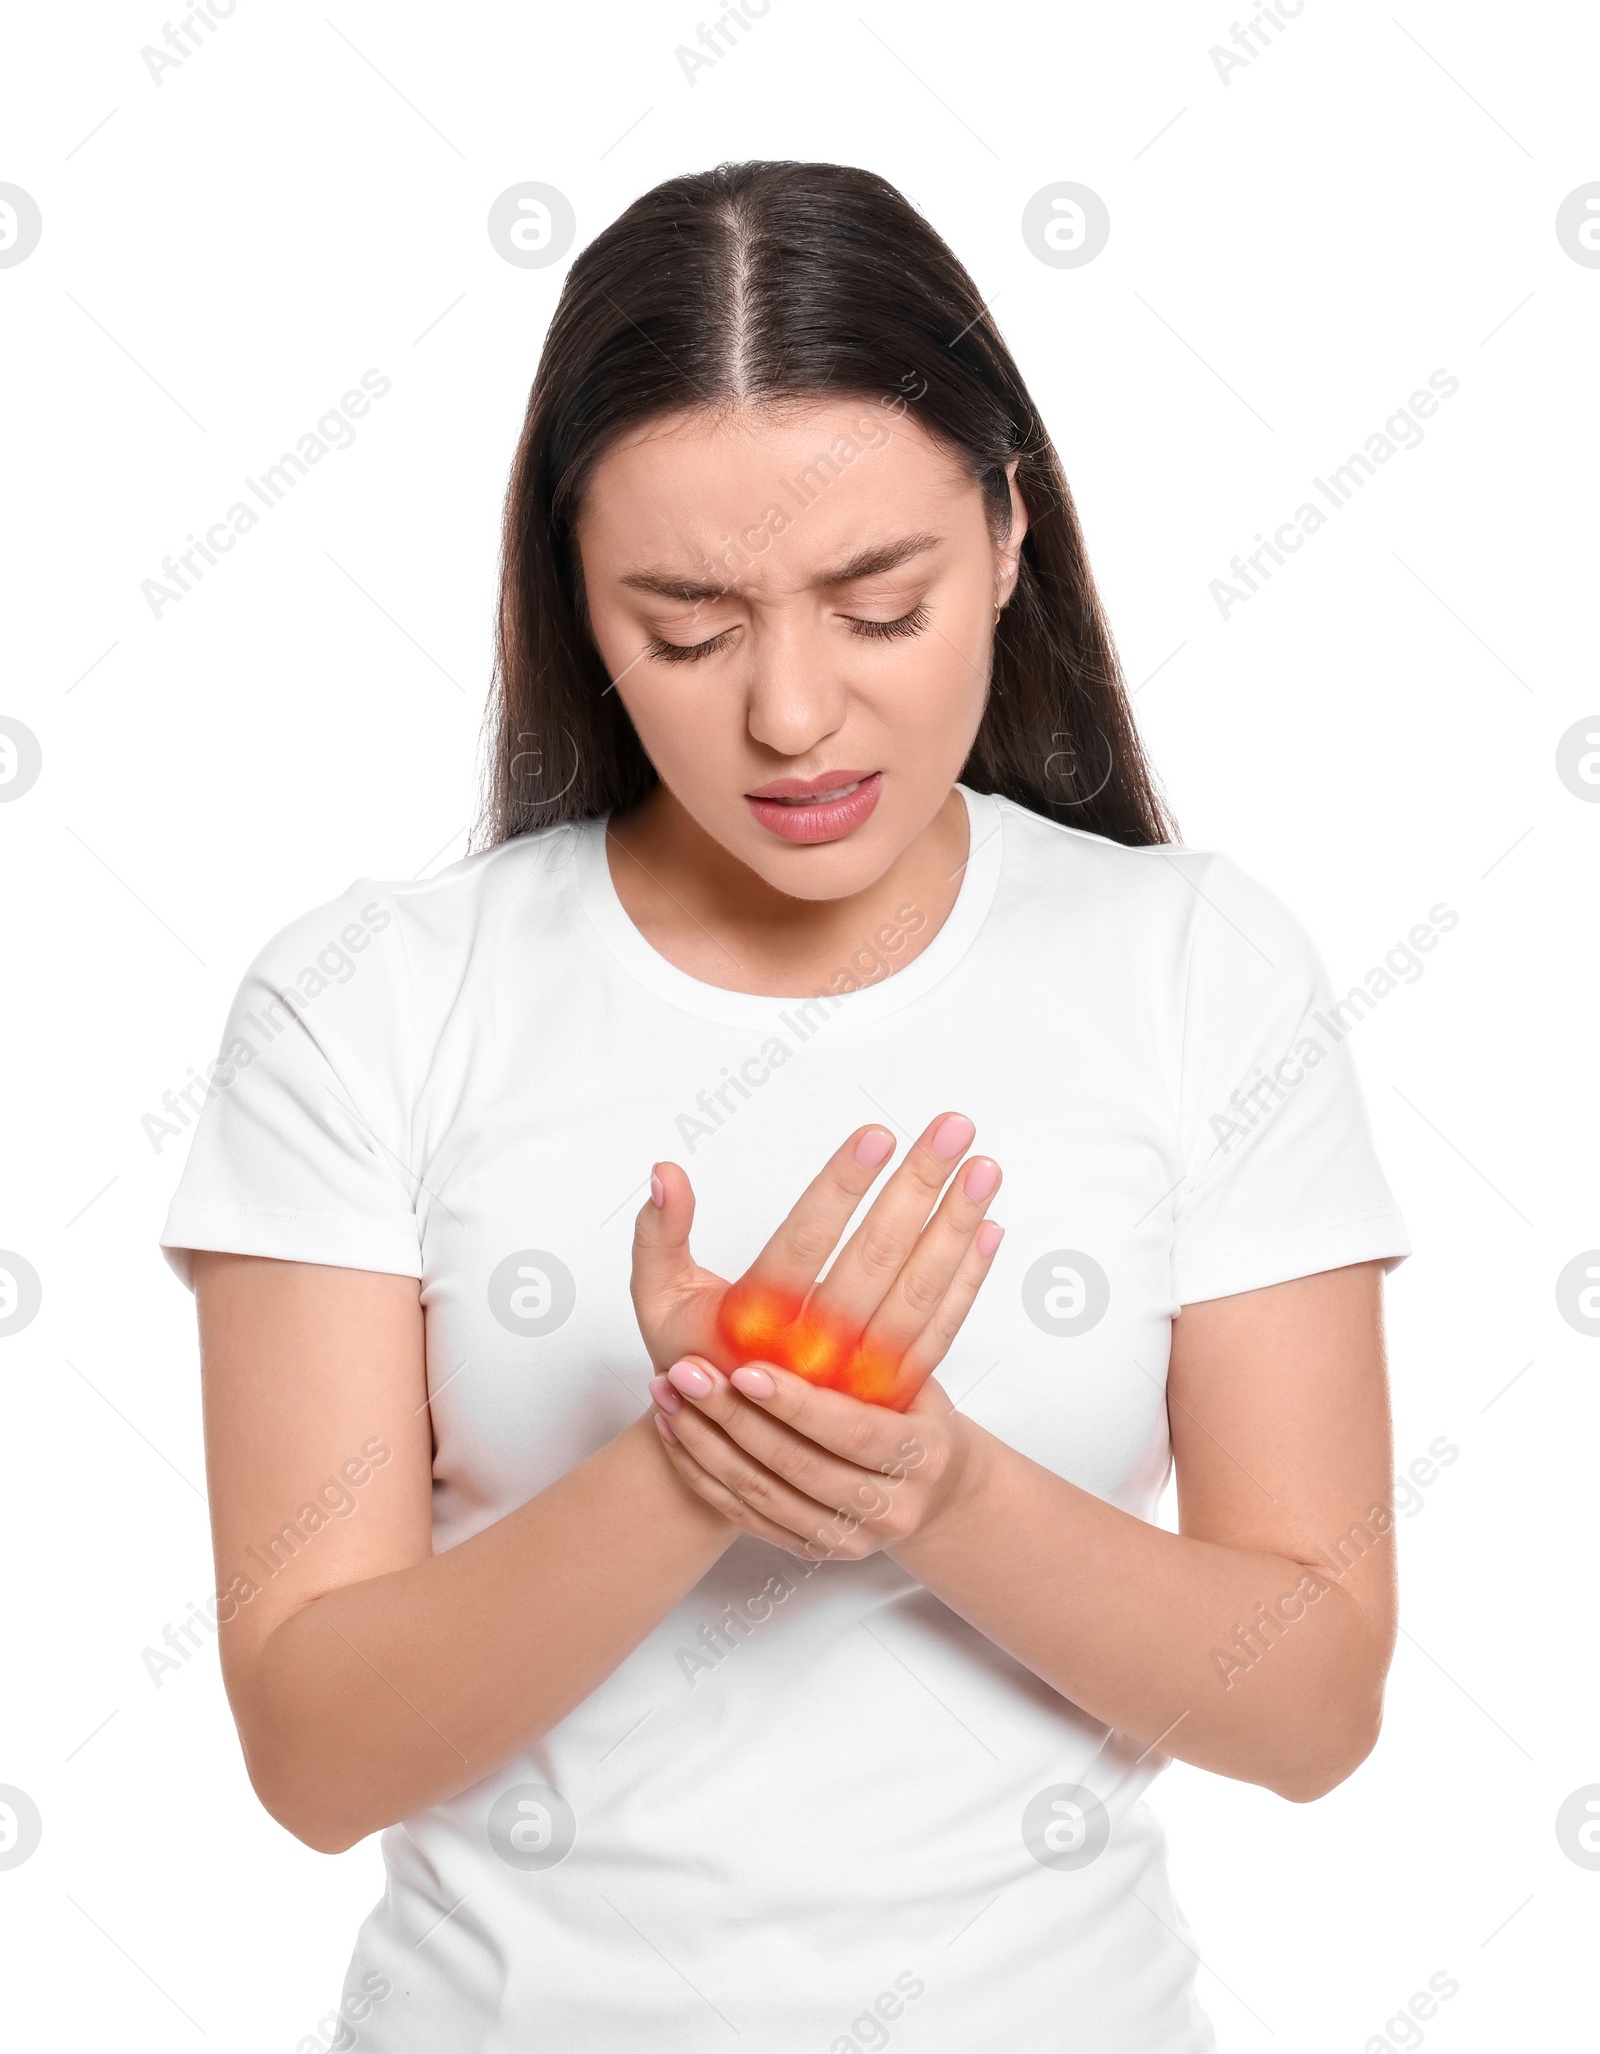 Image of Arthritis symptoms. Young woman suffering from pain in hand on white background